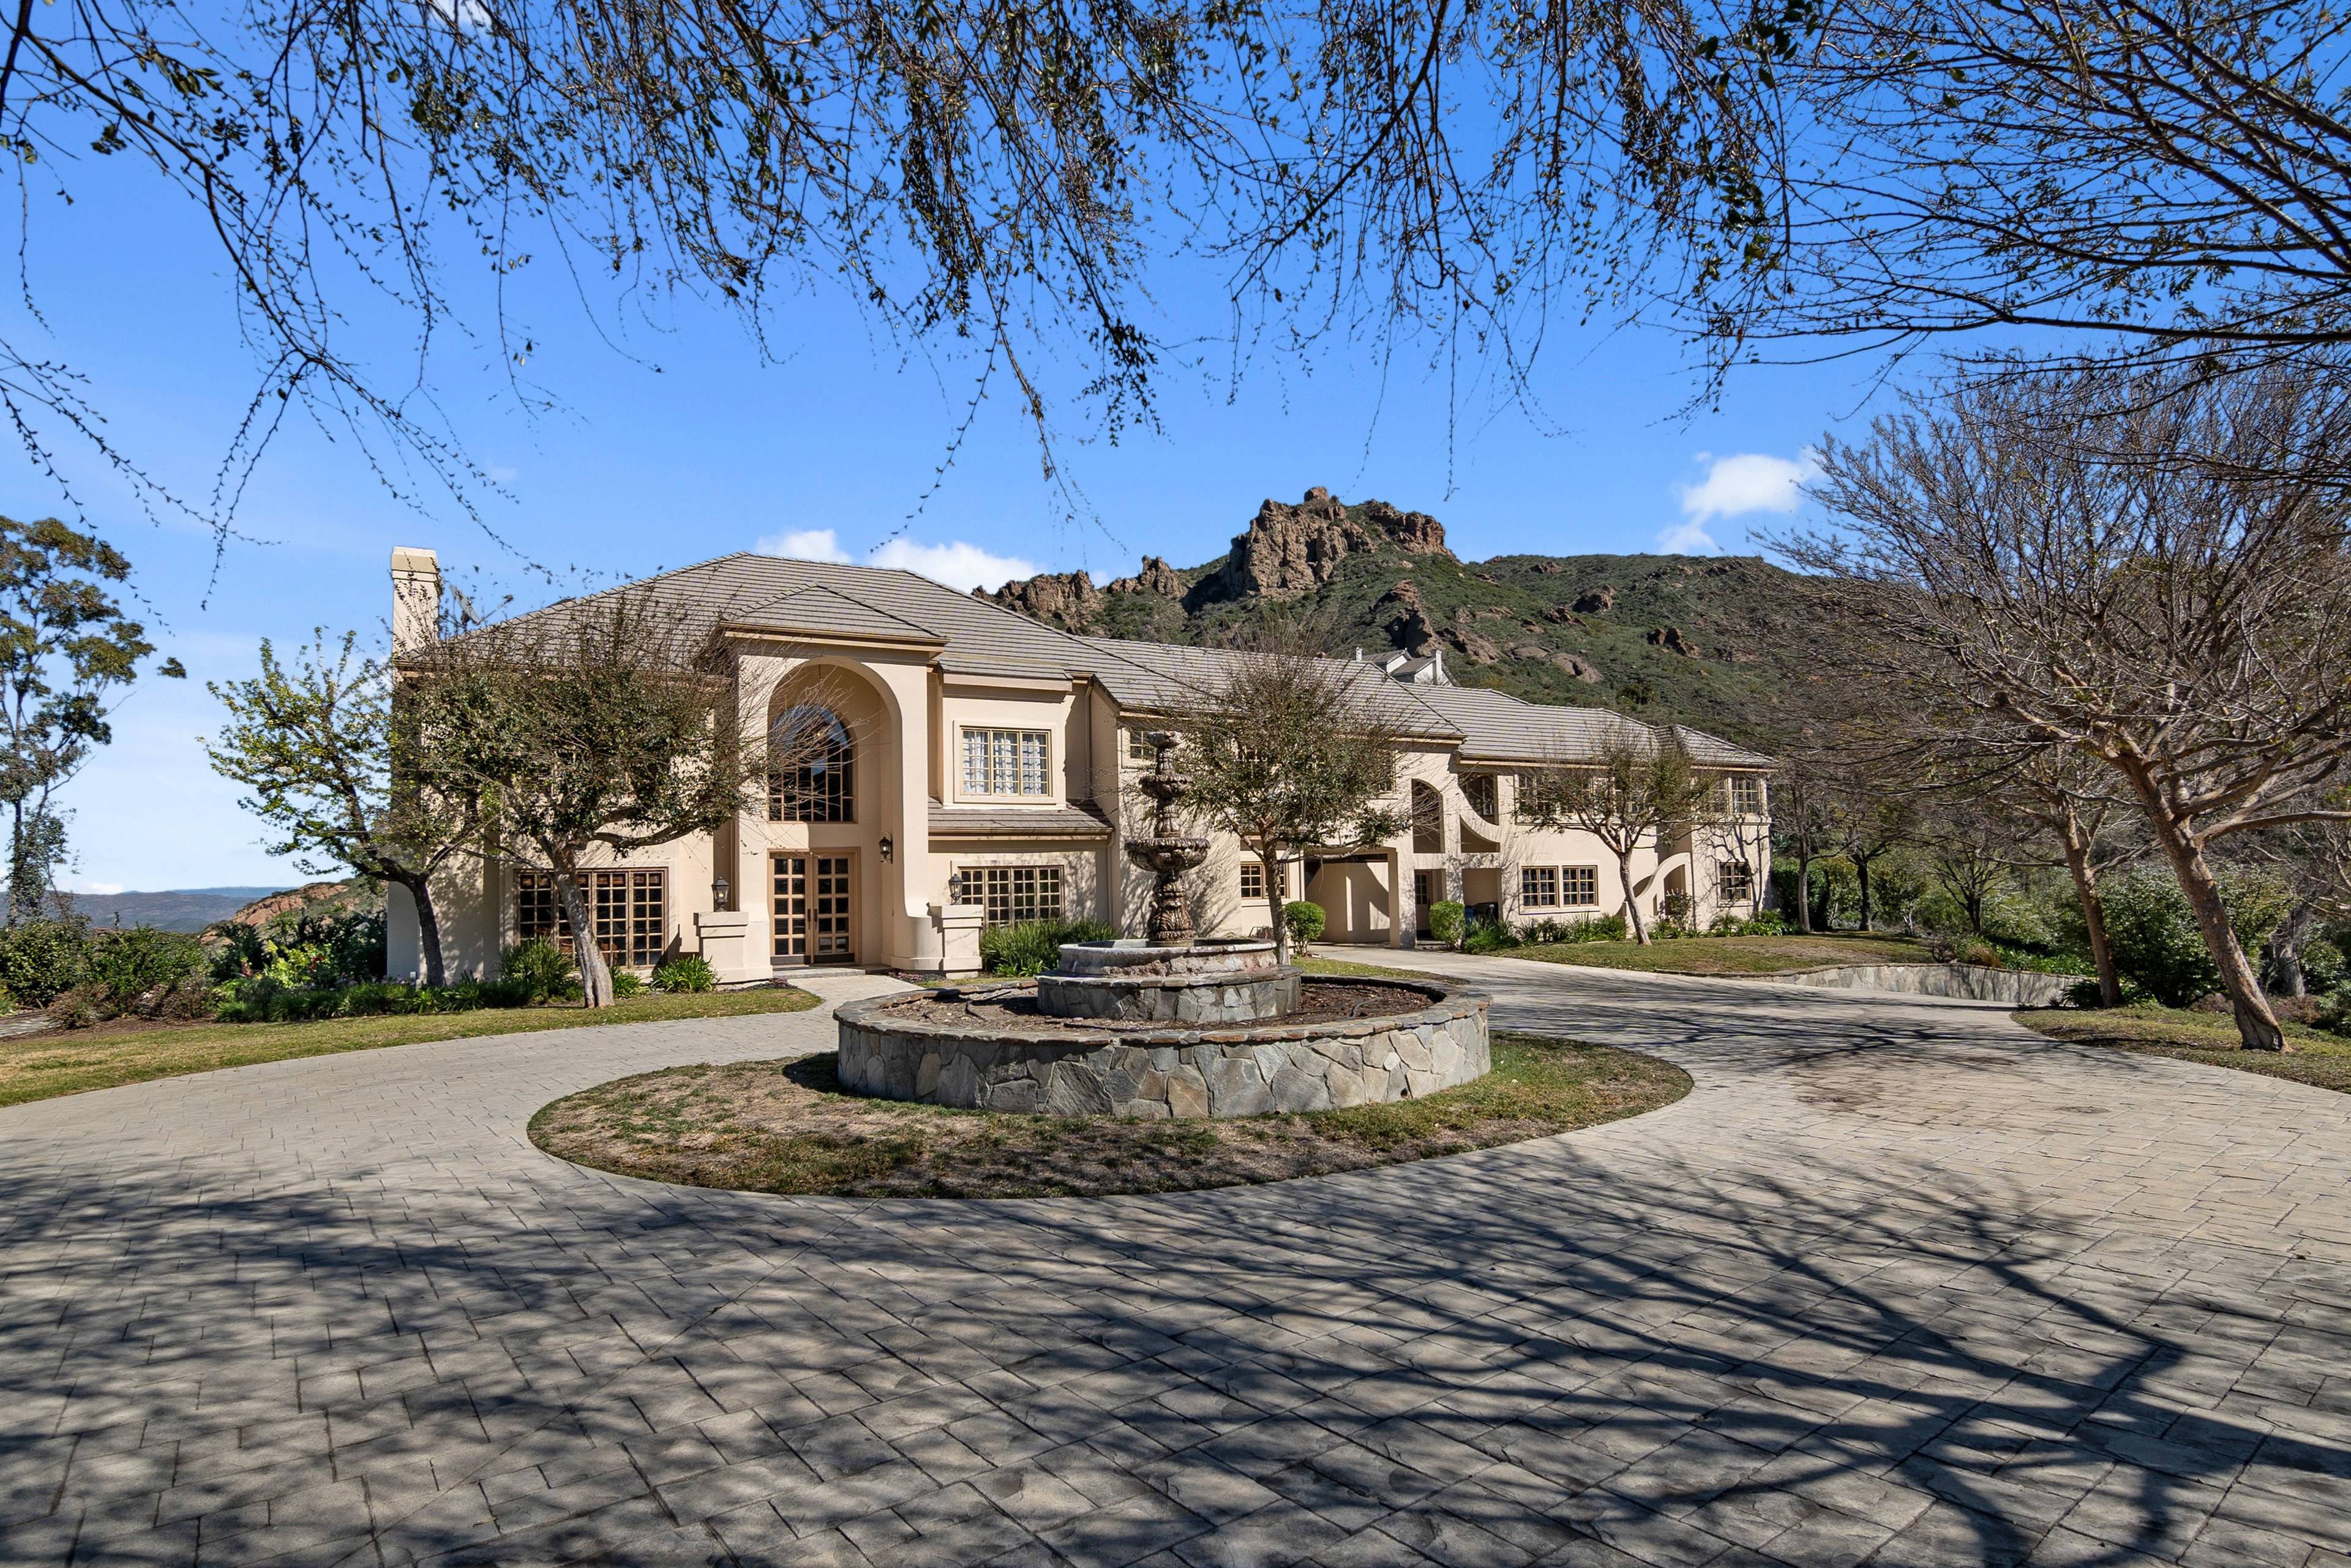 Malibu Manor offered for 5.299M is an incredible almost 5,000 sq ft estate on close to 5 acres in Malibu Wine Country and a Must See!!